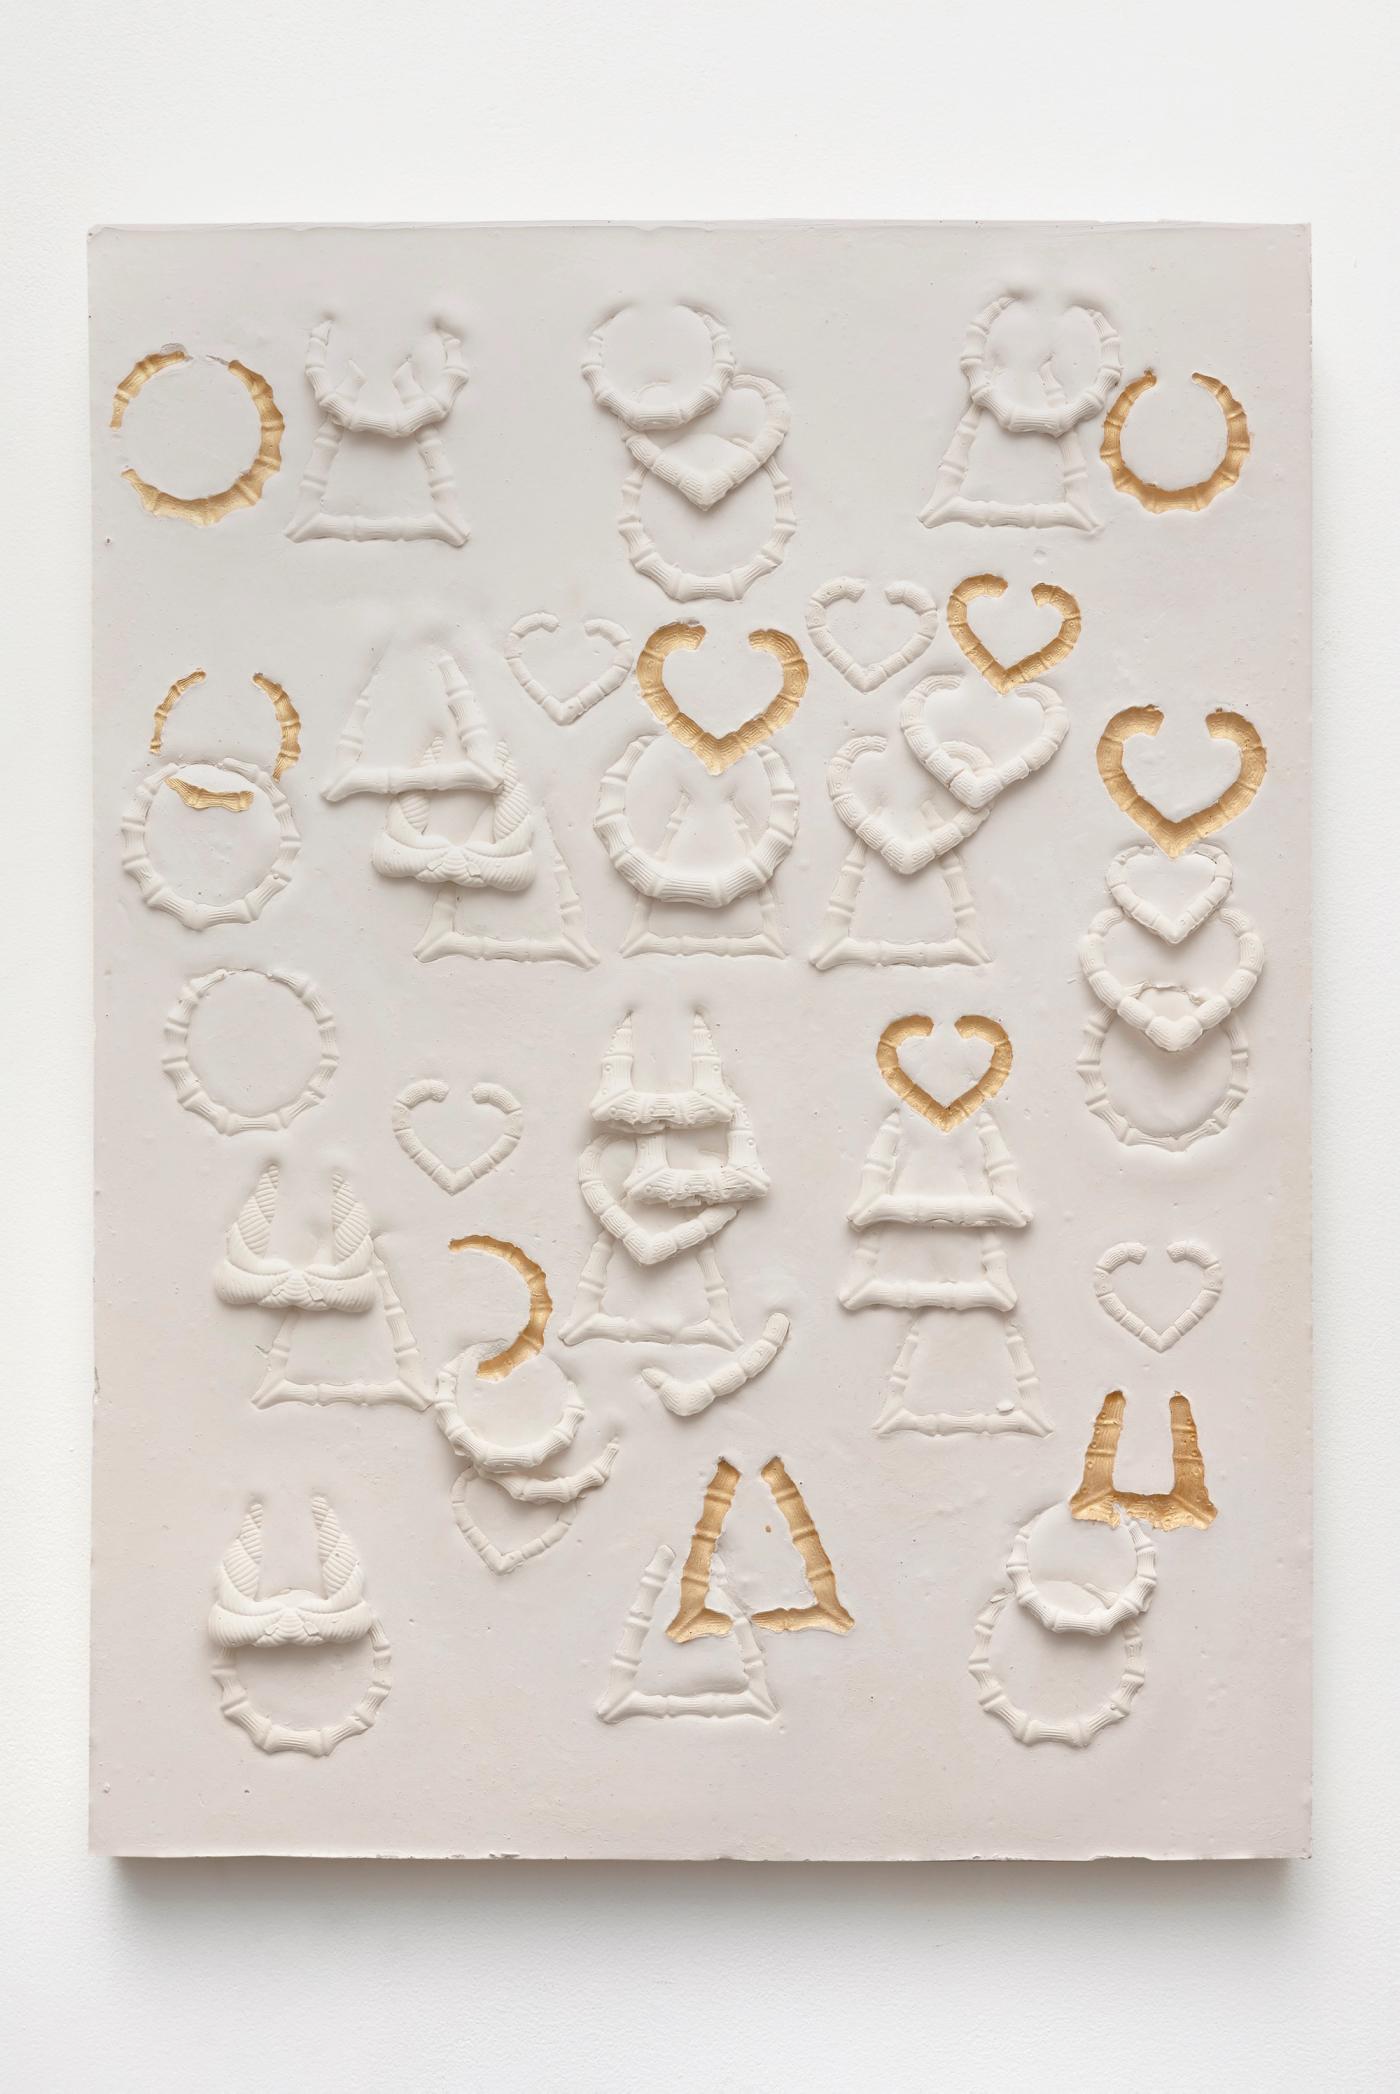 Image of Doorknocker Composition with Ten Gold Impressions, Medium, 2023: Plaster, foam and acrylic